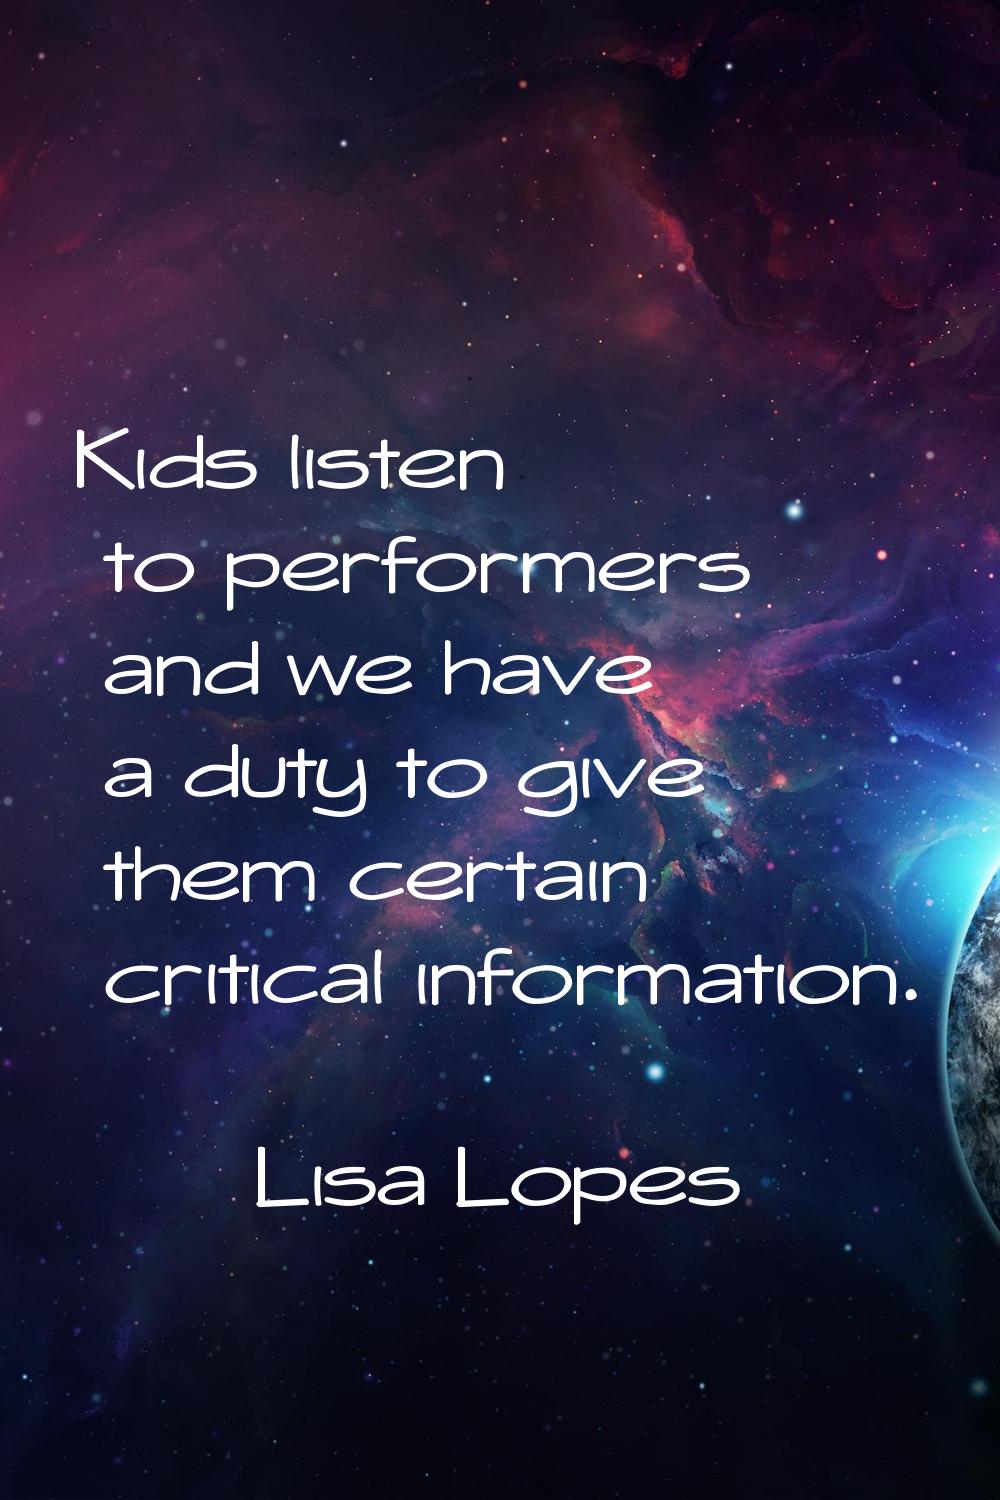 Kids listen to performers and we have a duty to give them certain critical information.